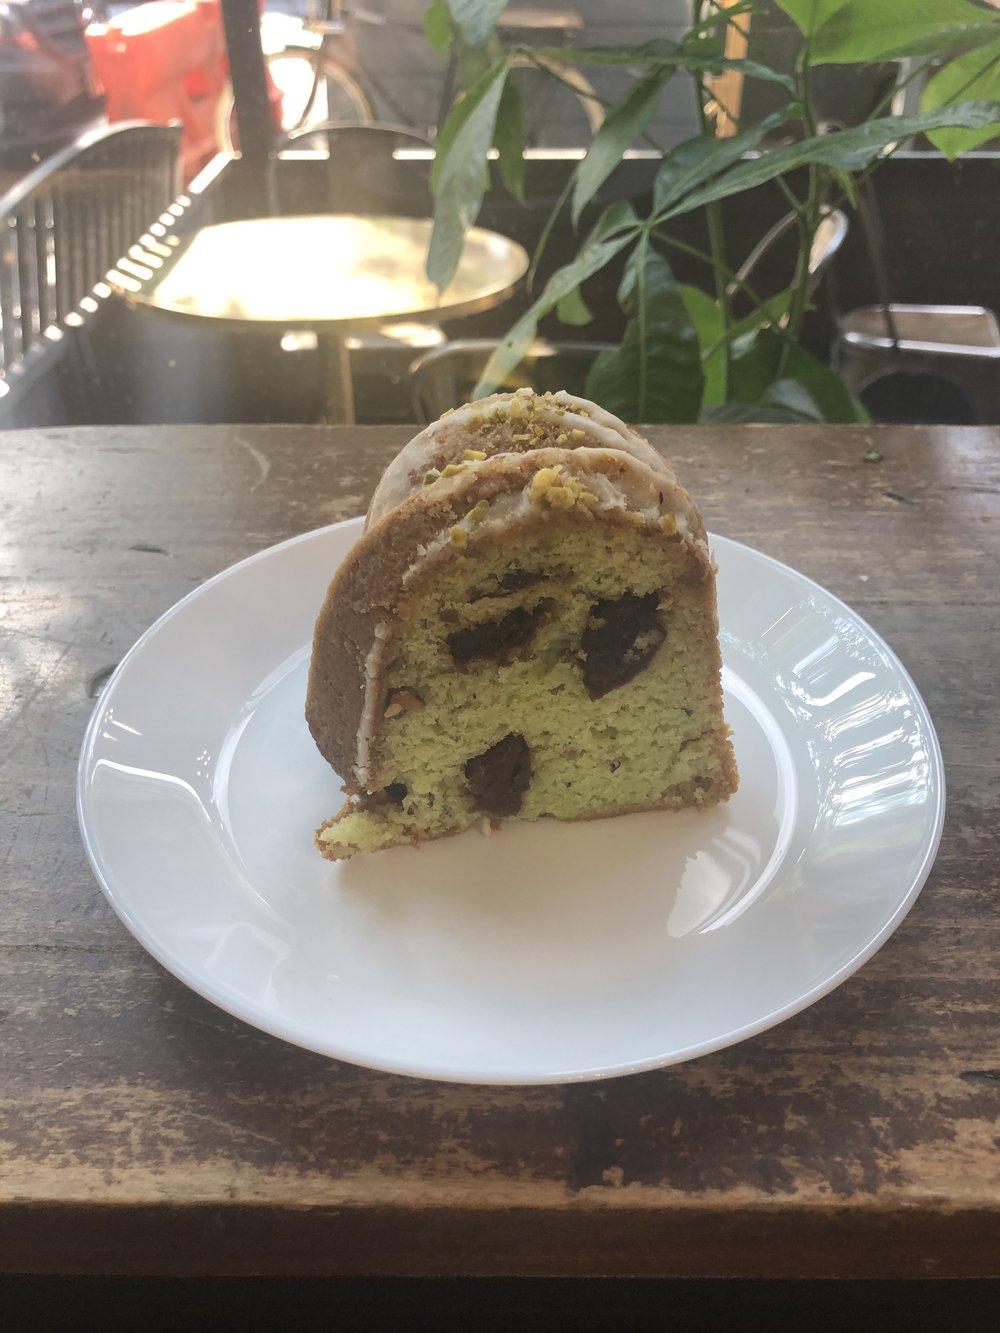 Pistachio cake with fat currants